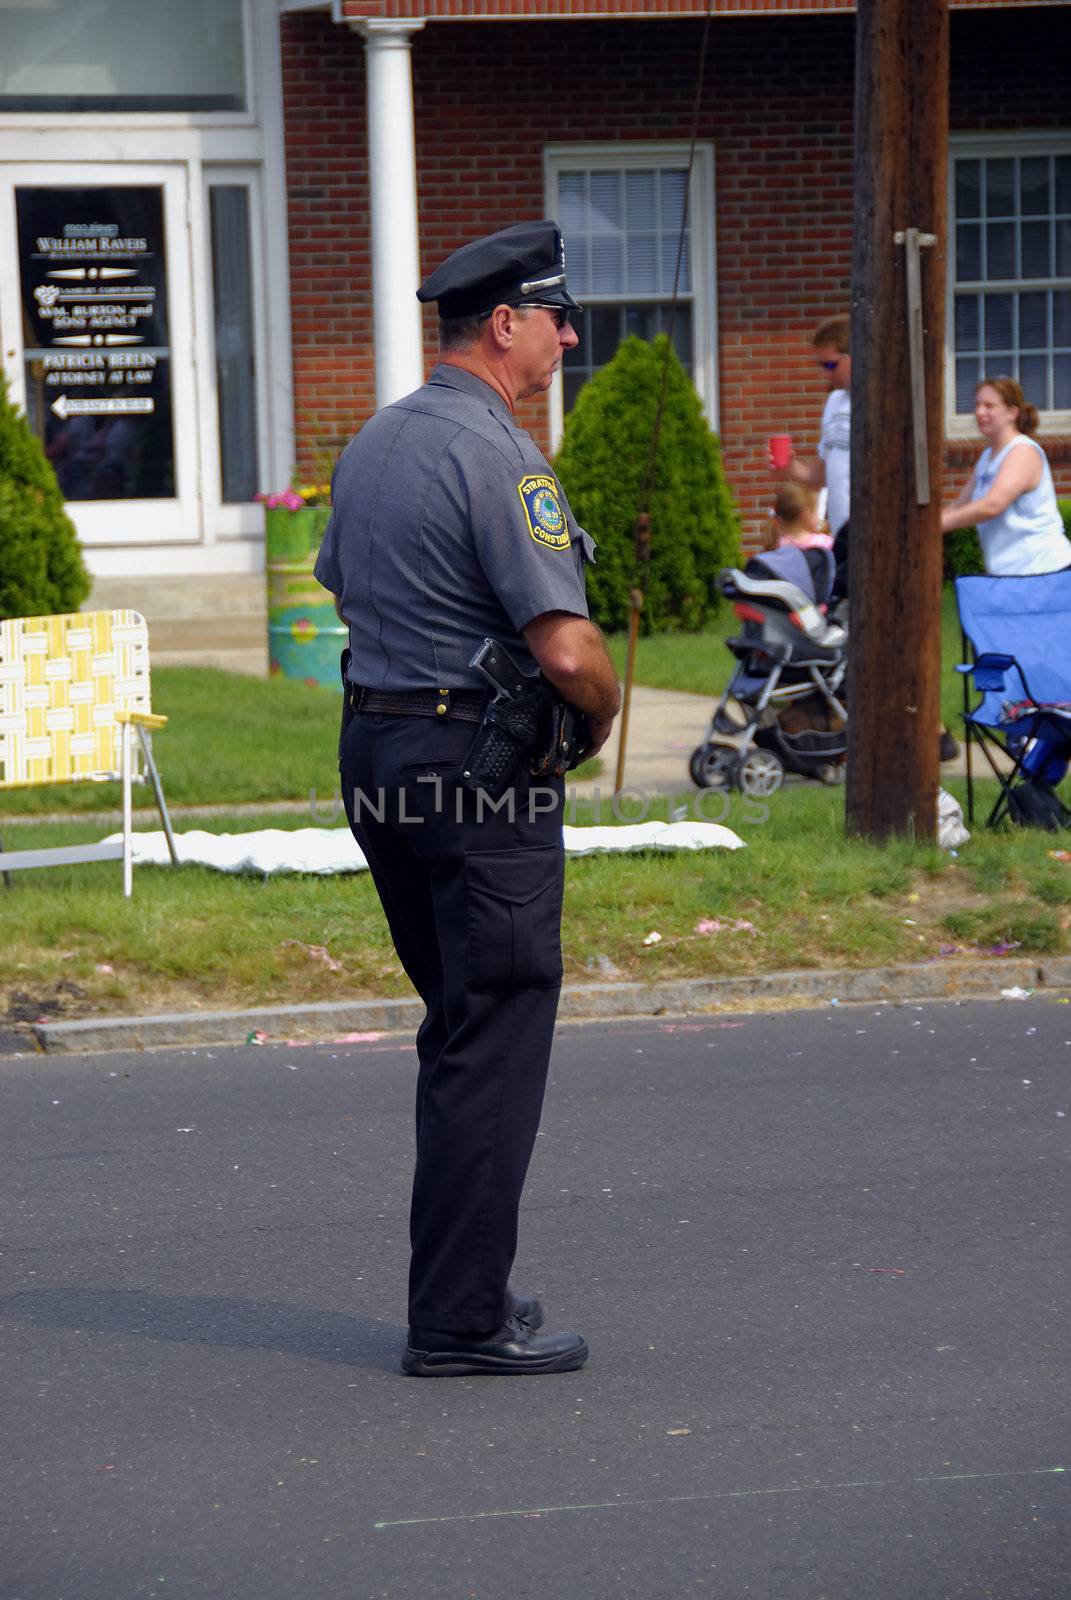 A cop during patrol on a memorial day